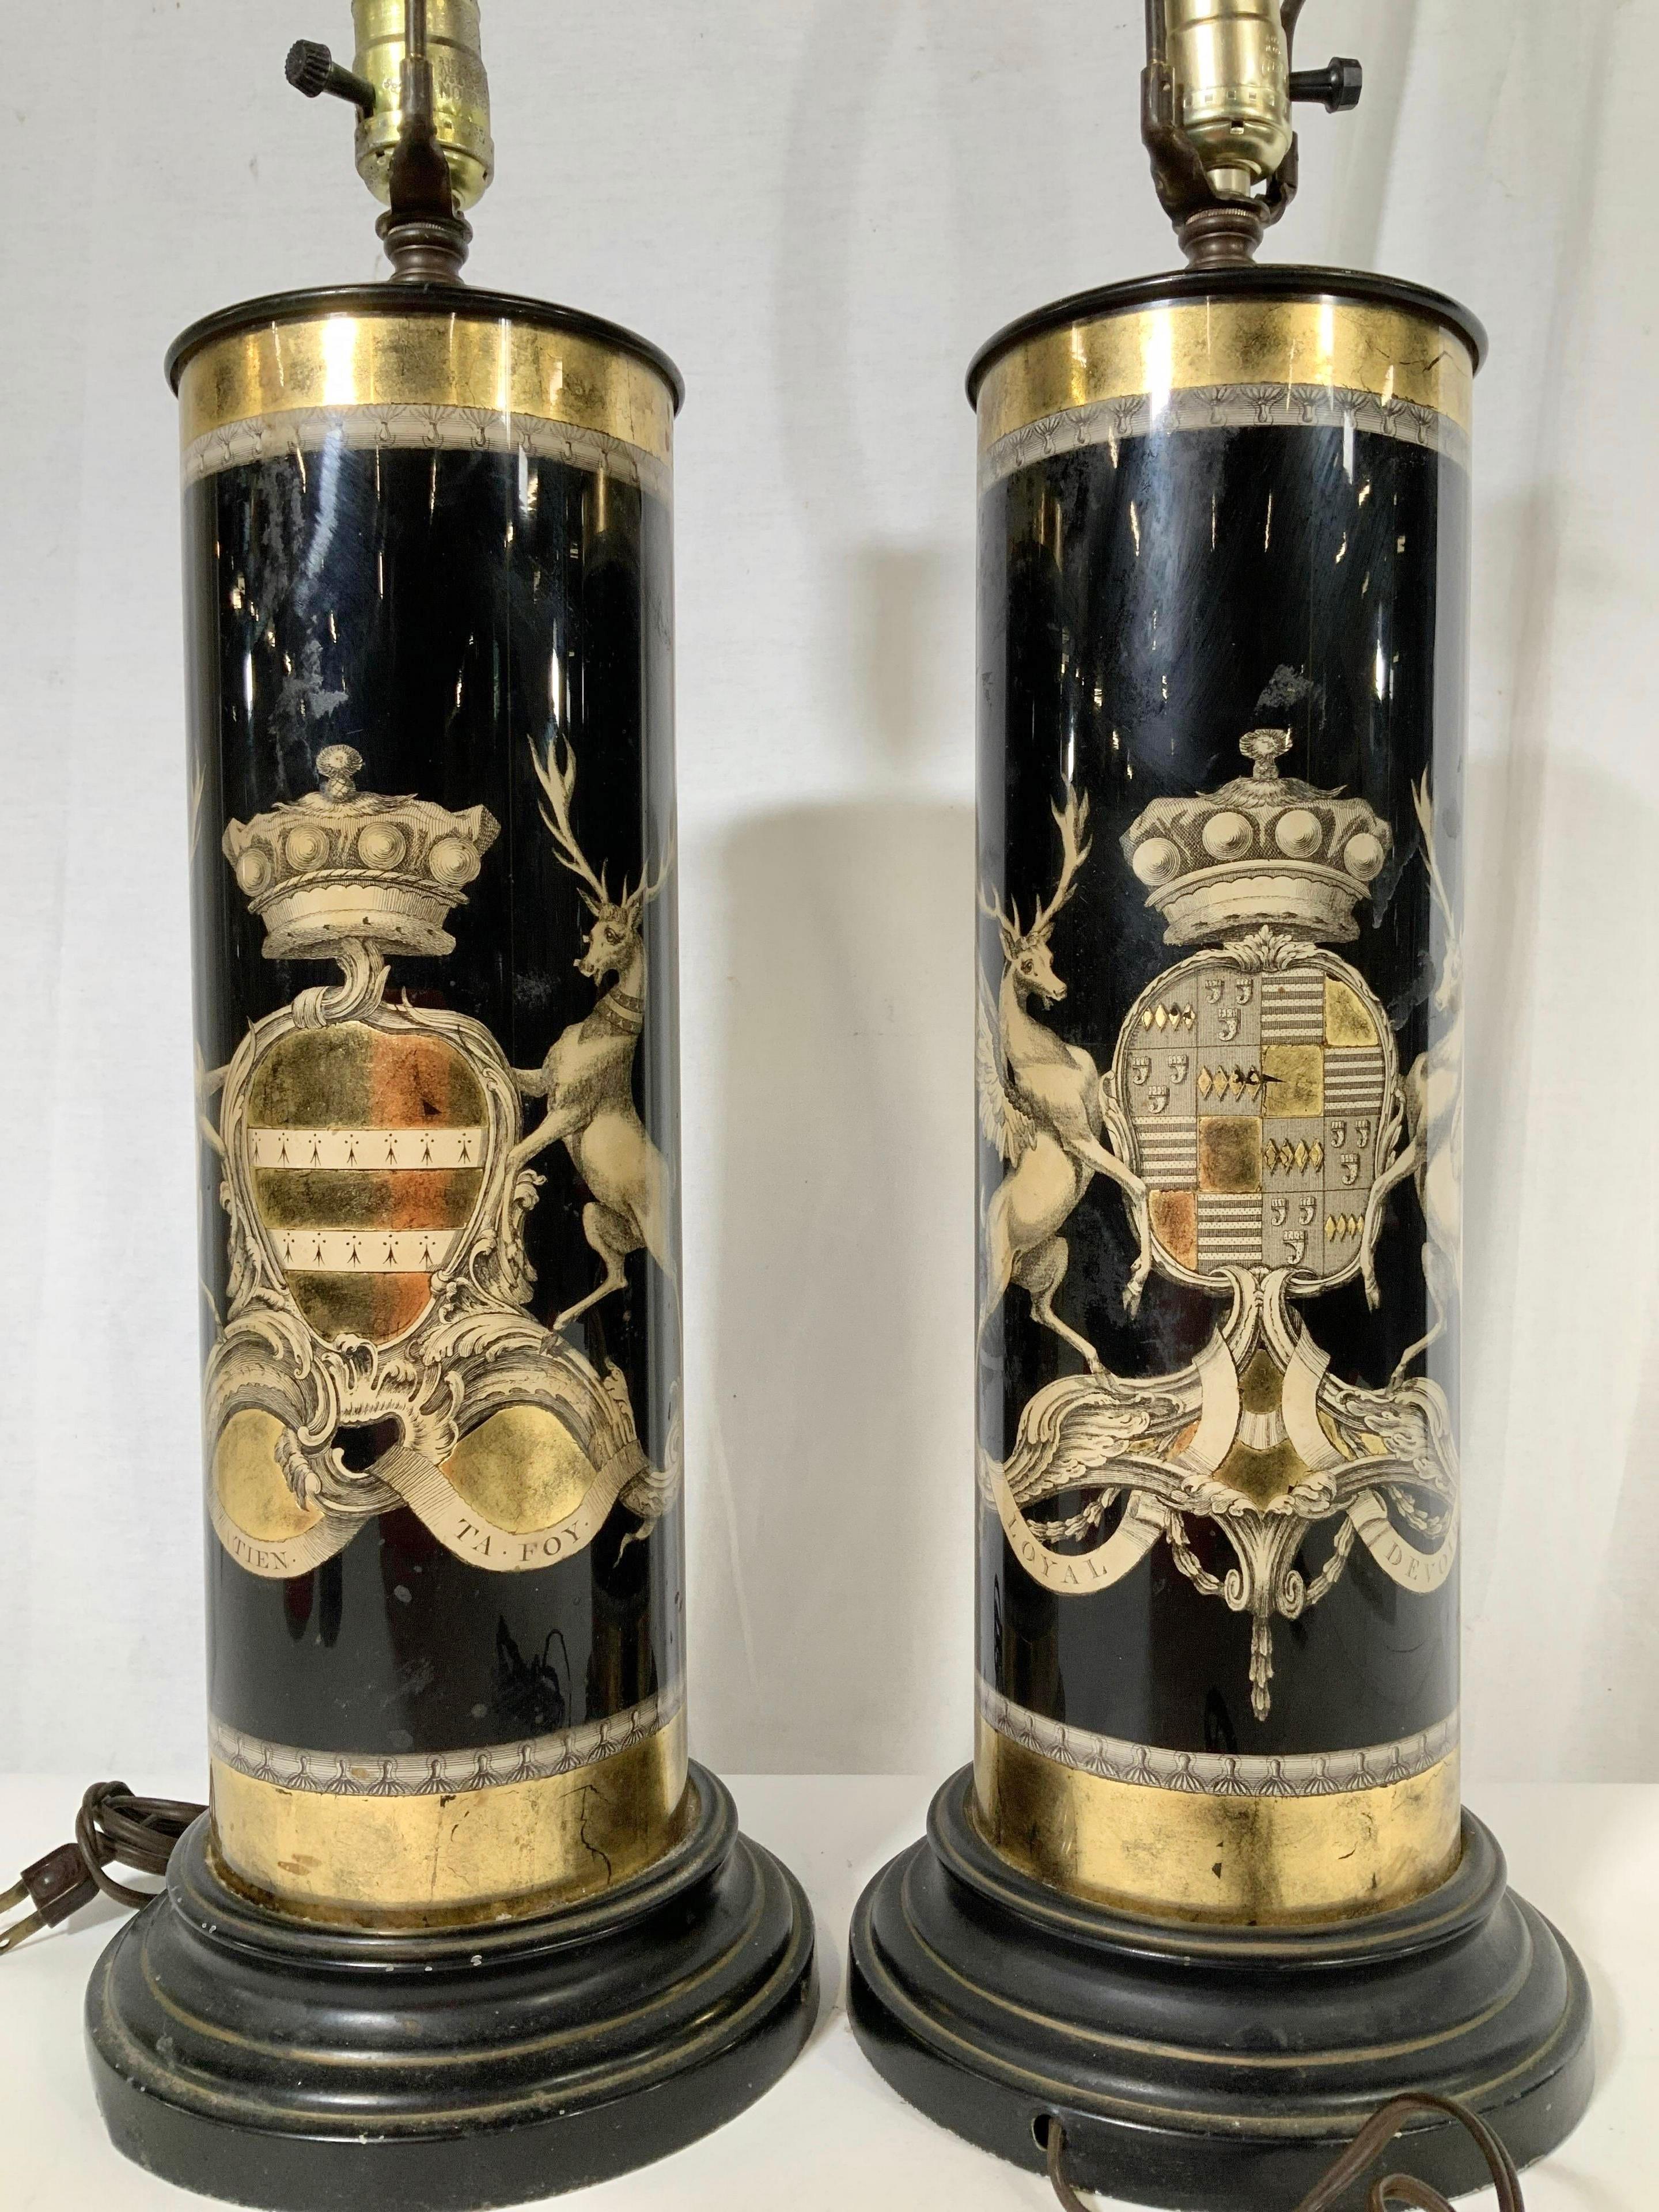 Mid-20th Century Pair of Verre Églomisé Lamps Coats of Arms for the Earls Bathurst and Granville For Sale